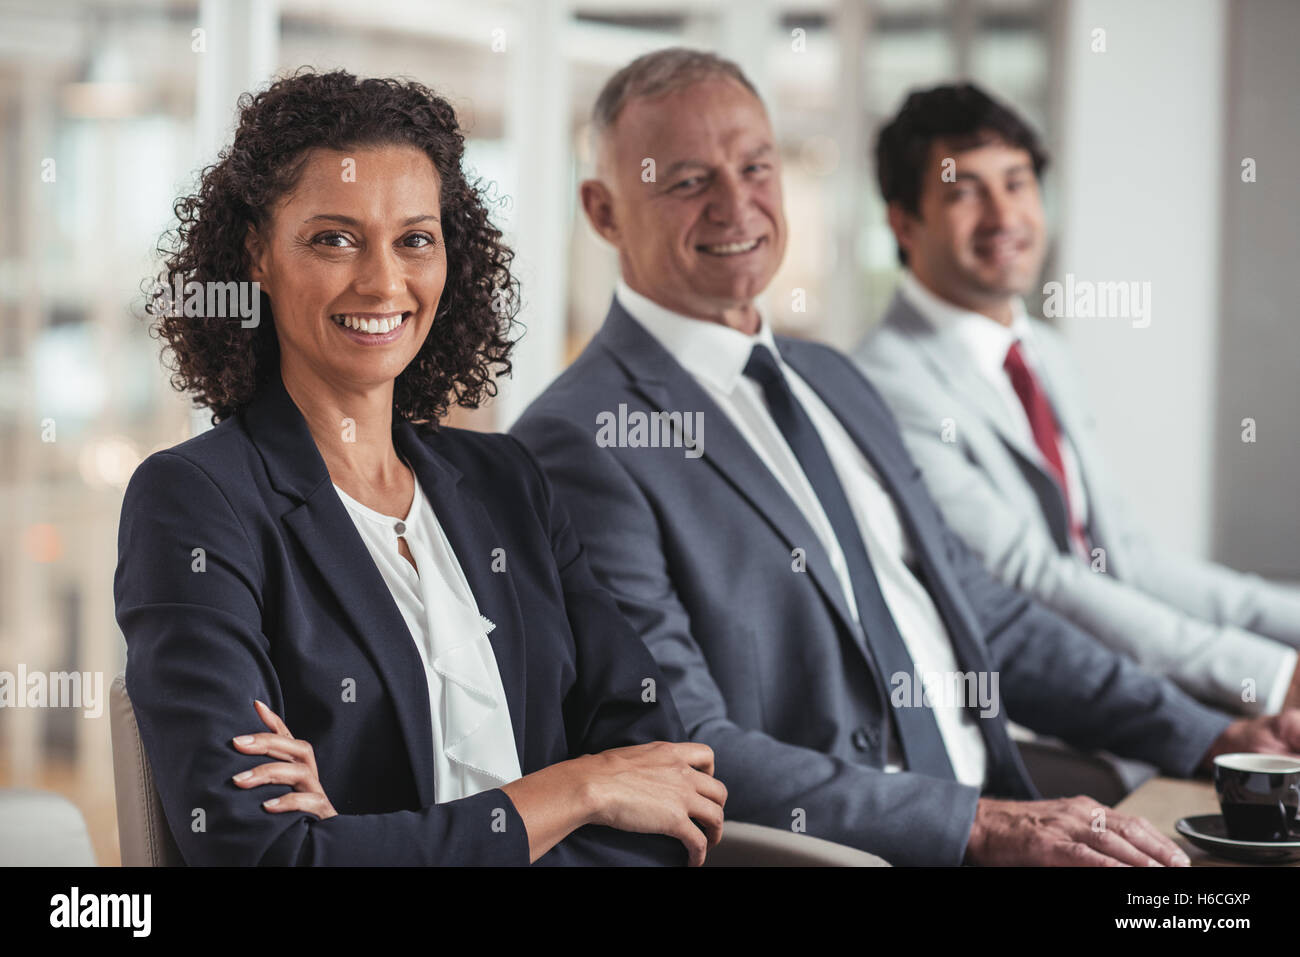 Success has this business team smiling Stock Photo